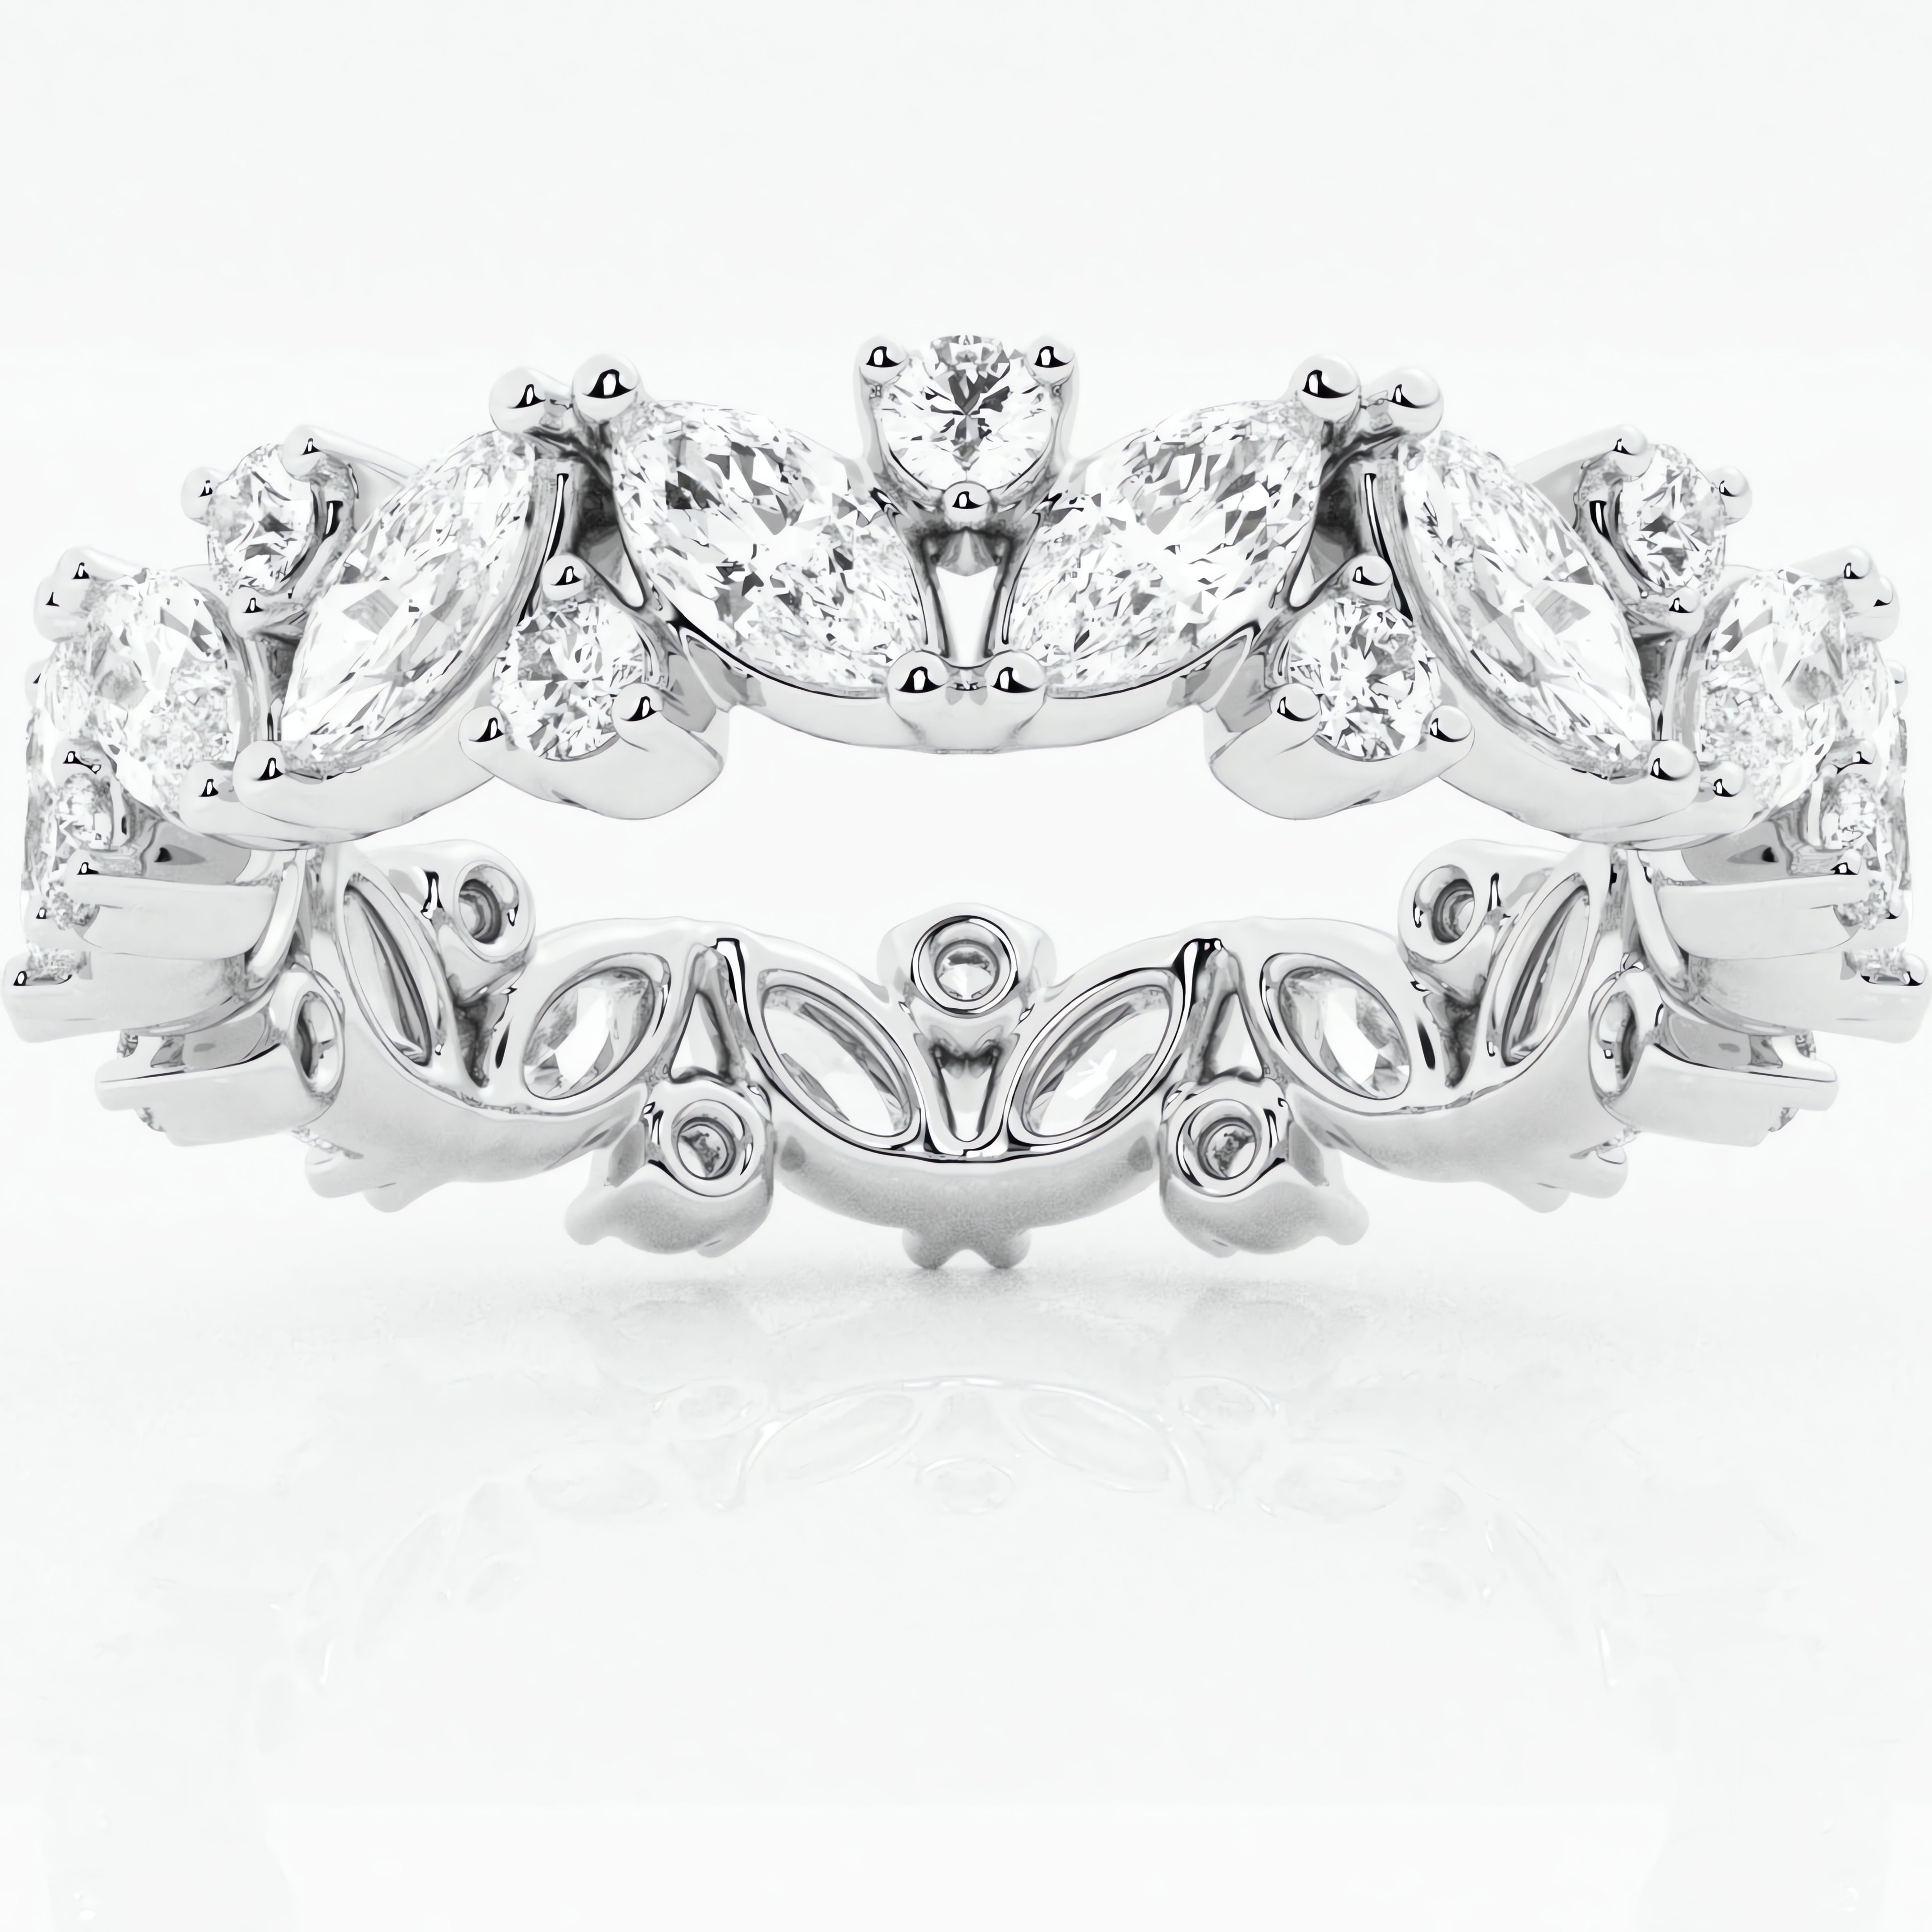 14kt white gold/4/4.25/4.5/4.75/5/5.25/5.5/5.75/6/6.25/6.5/6.75/7/7.25/7.5/7.75/8/8.25/8.5/8.75/9/top